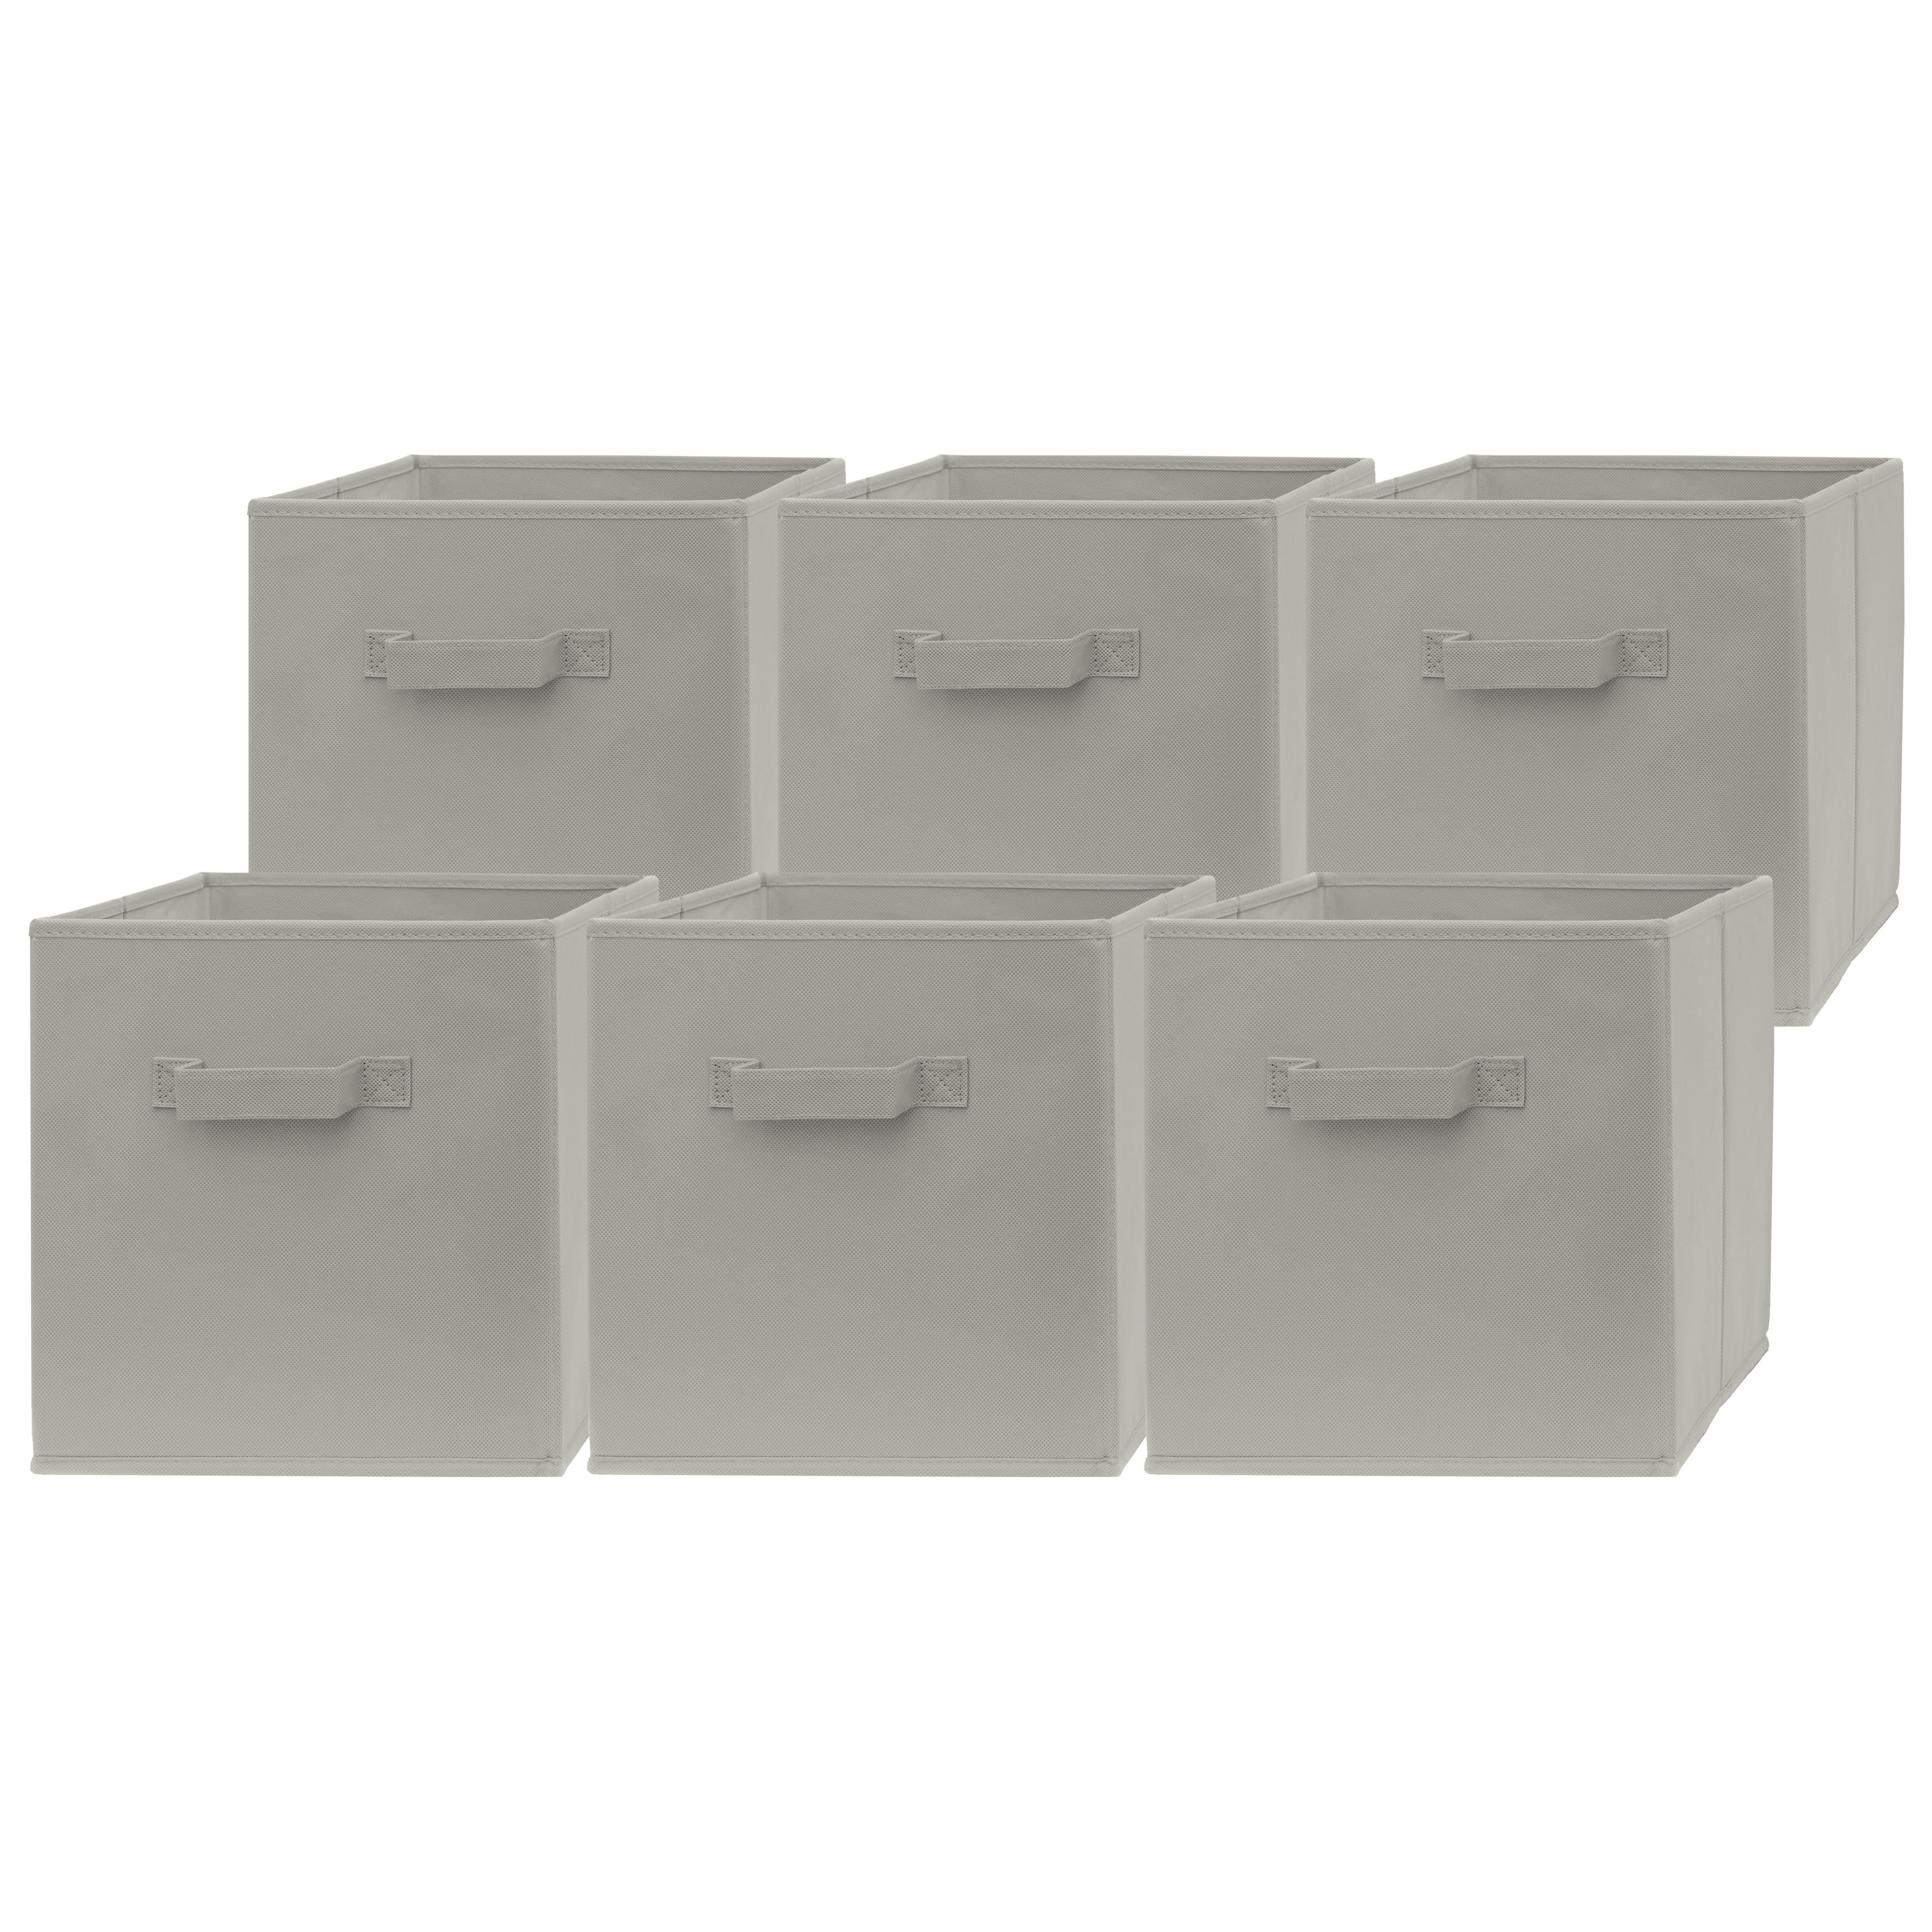 12x12 storage boxes – 64 Ounce Games